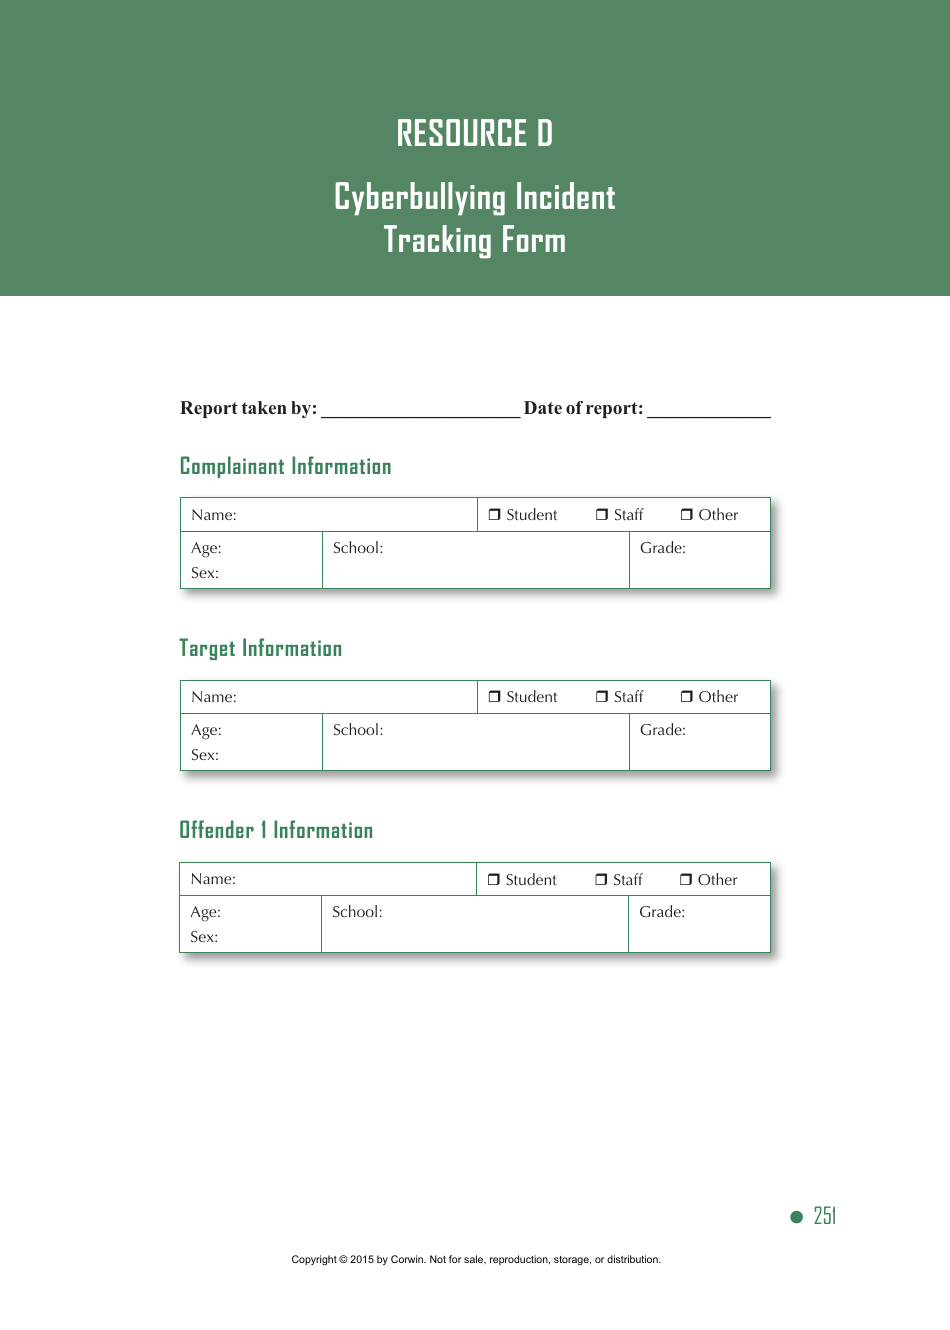 Cyberbullying Incident Tracking Form, Page 1